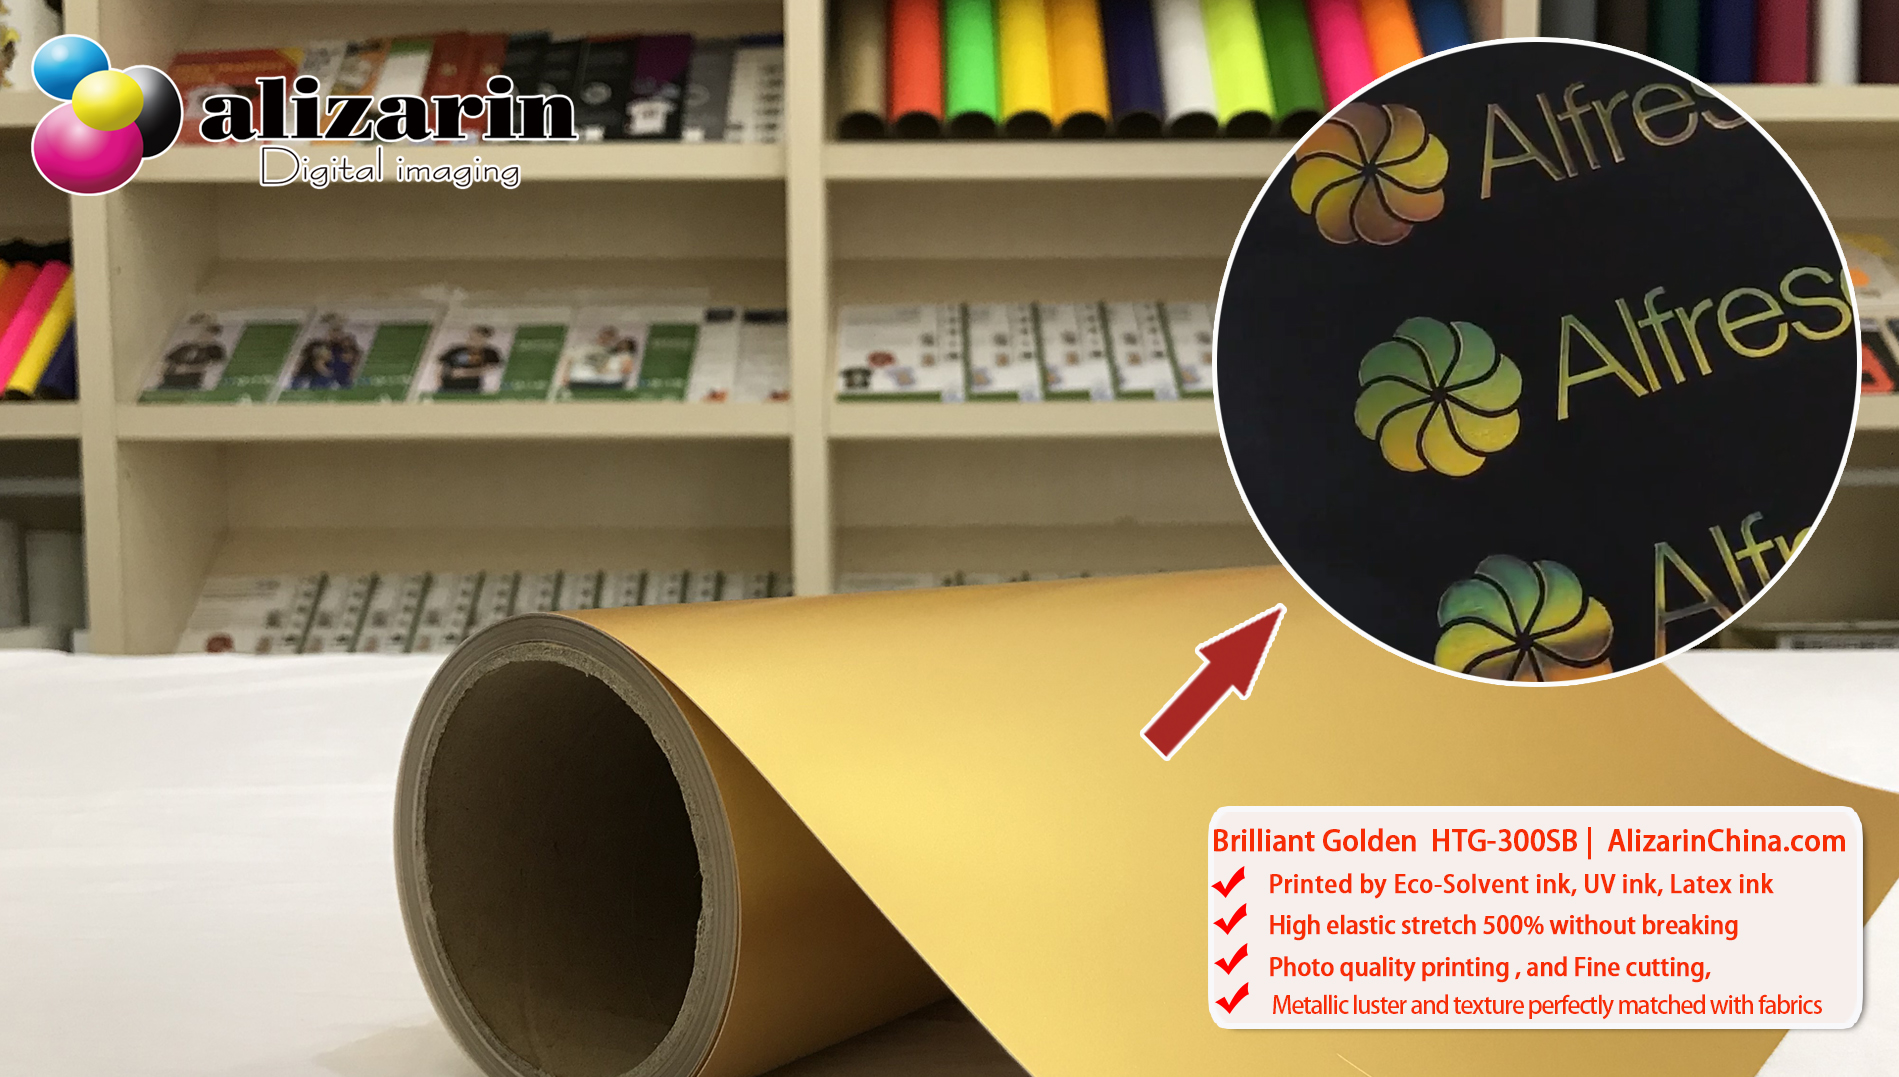 Printable Brilliant Golden HTG-300SB printed by Eco-Solvent ink, latex ink, UV ink for Personalized Brilliant colorful Apparel & Decorative Textiles, leathers | AlizarinChina.com